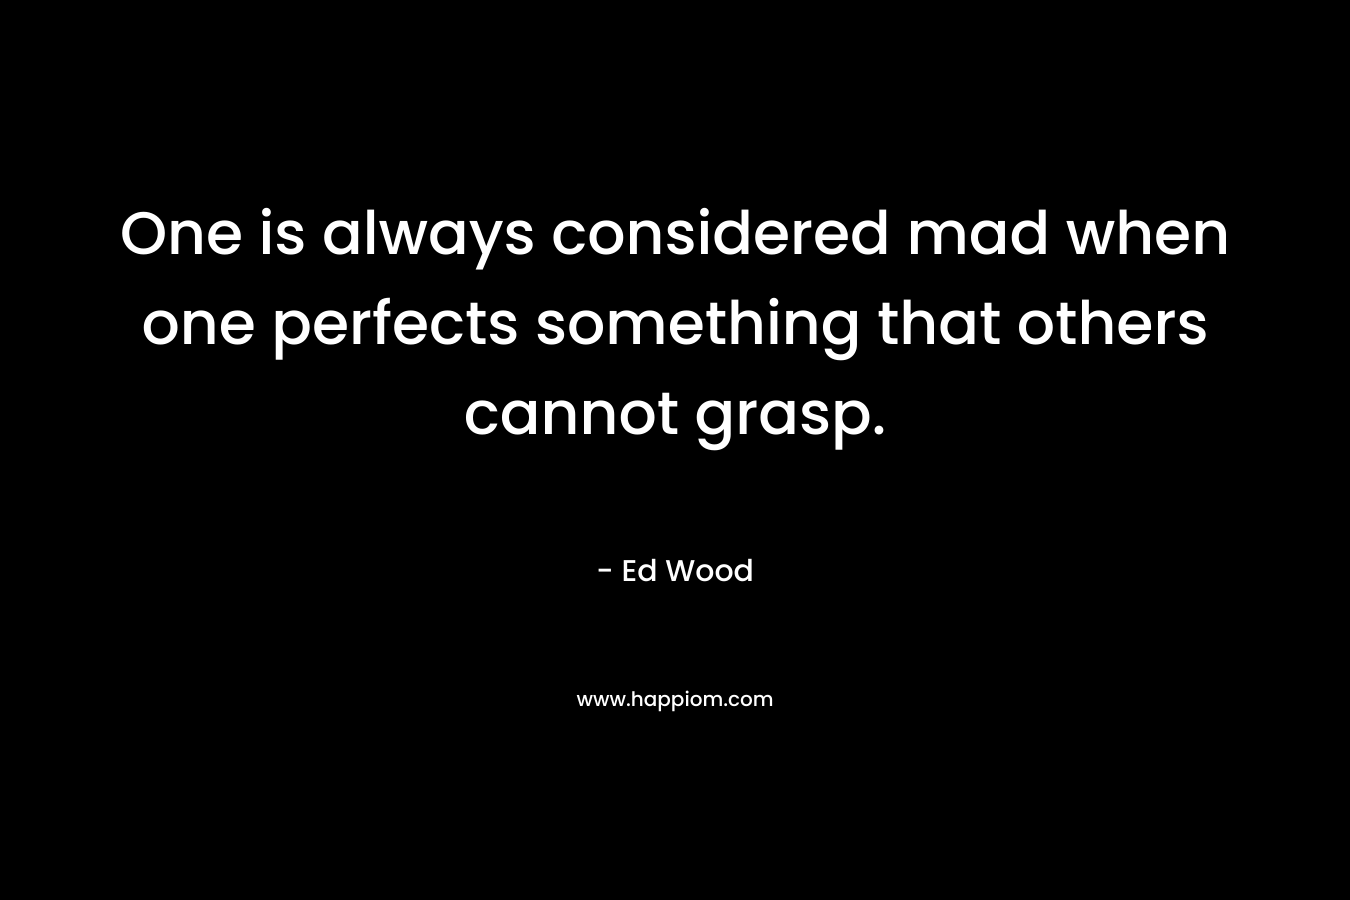 One is always considered mad when one perfects something that others cannot grasp. – Ed Wood